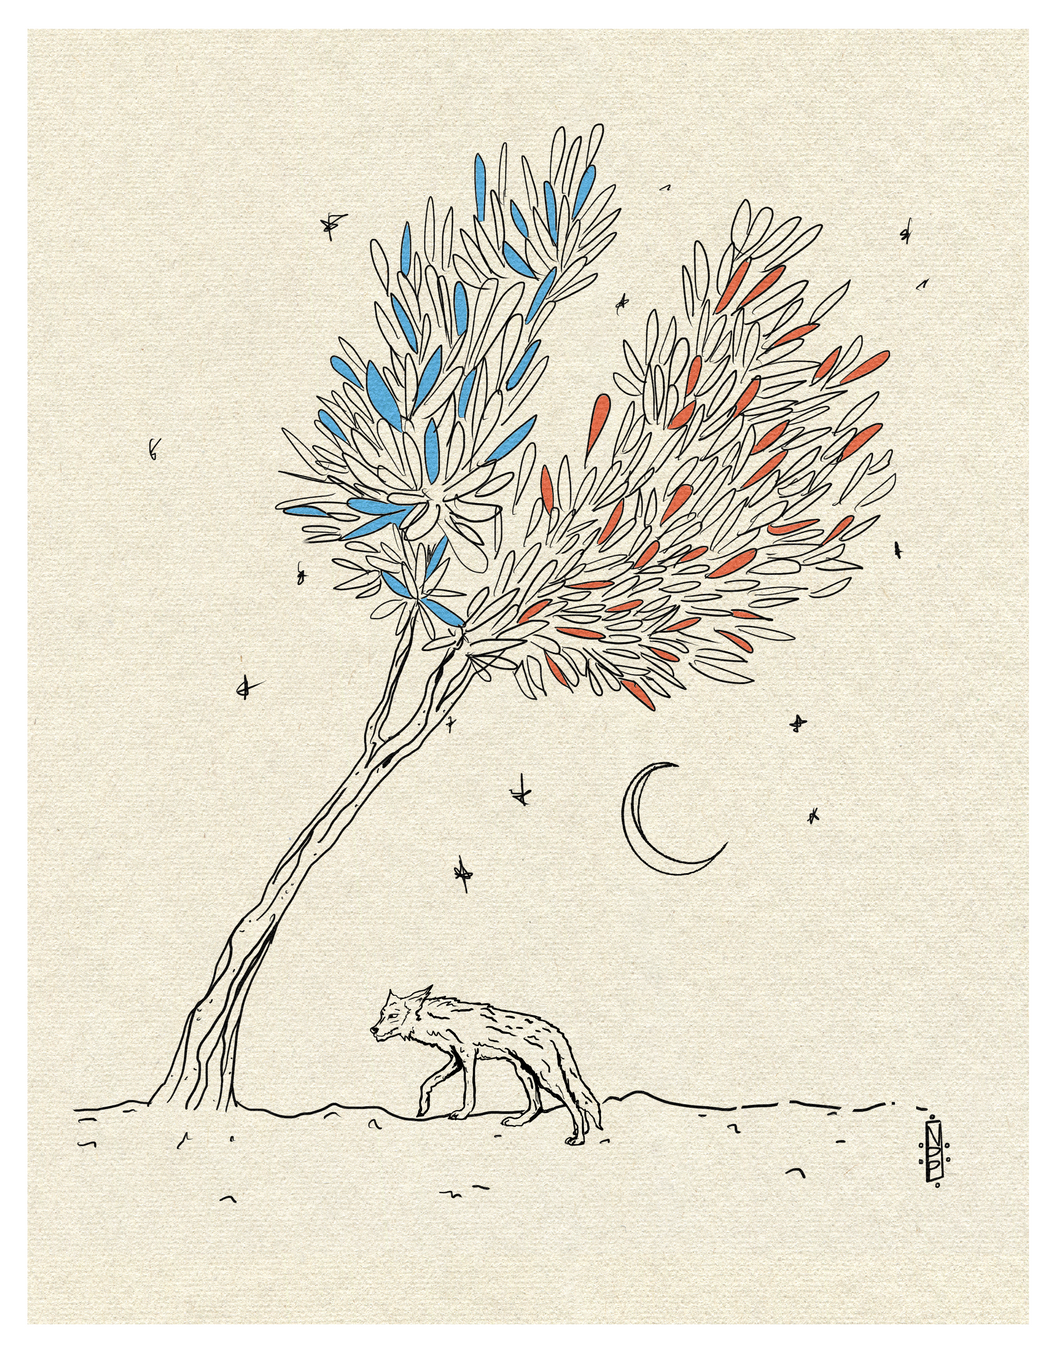 Night Wolf and The Tree